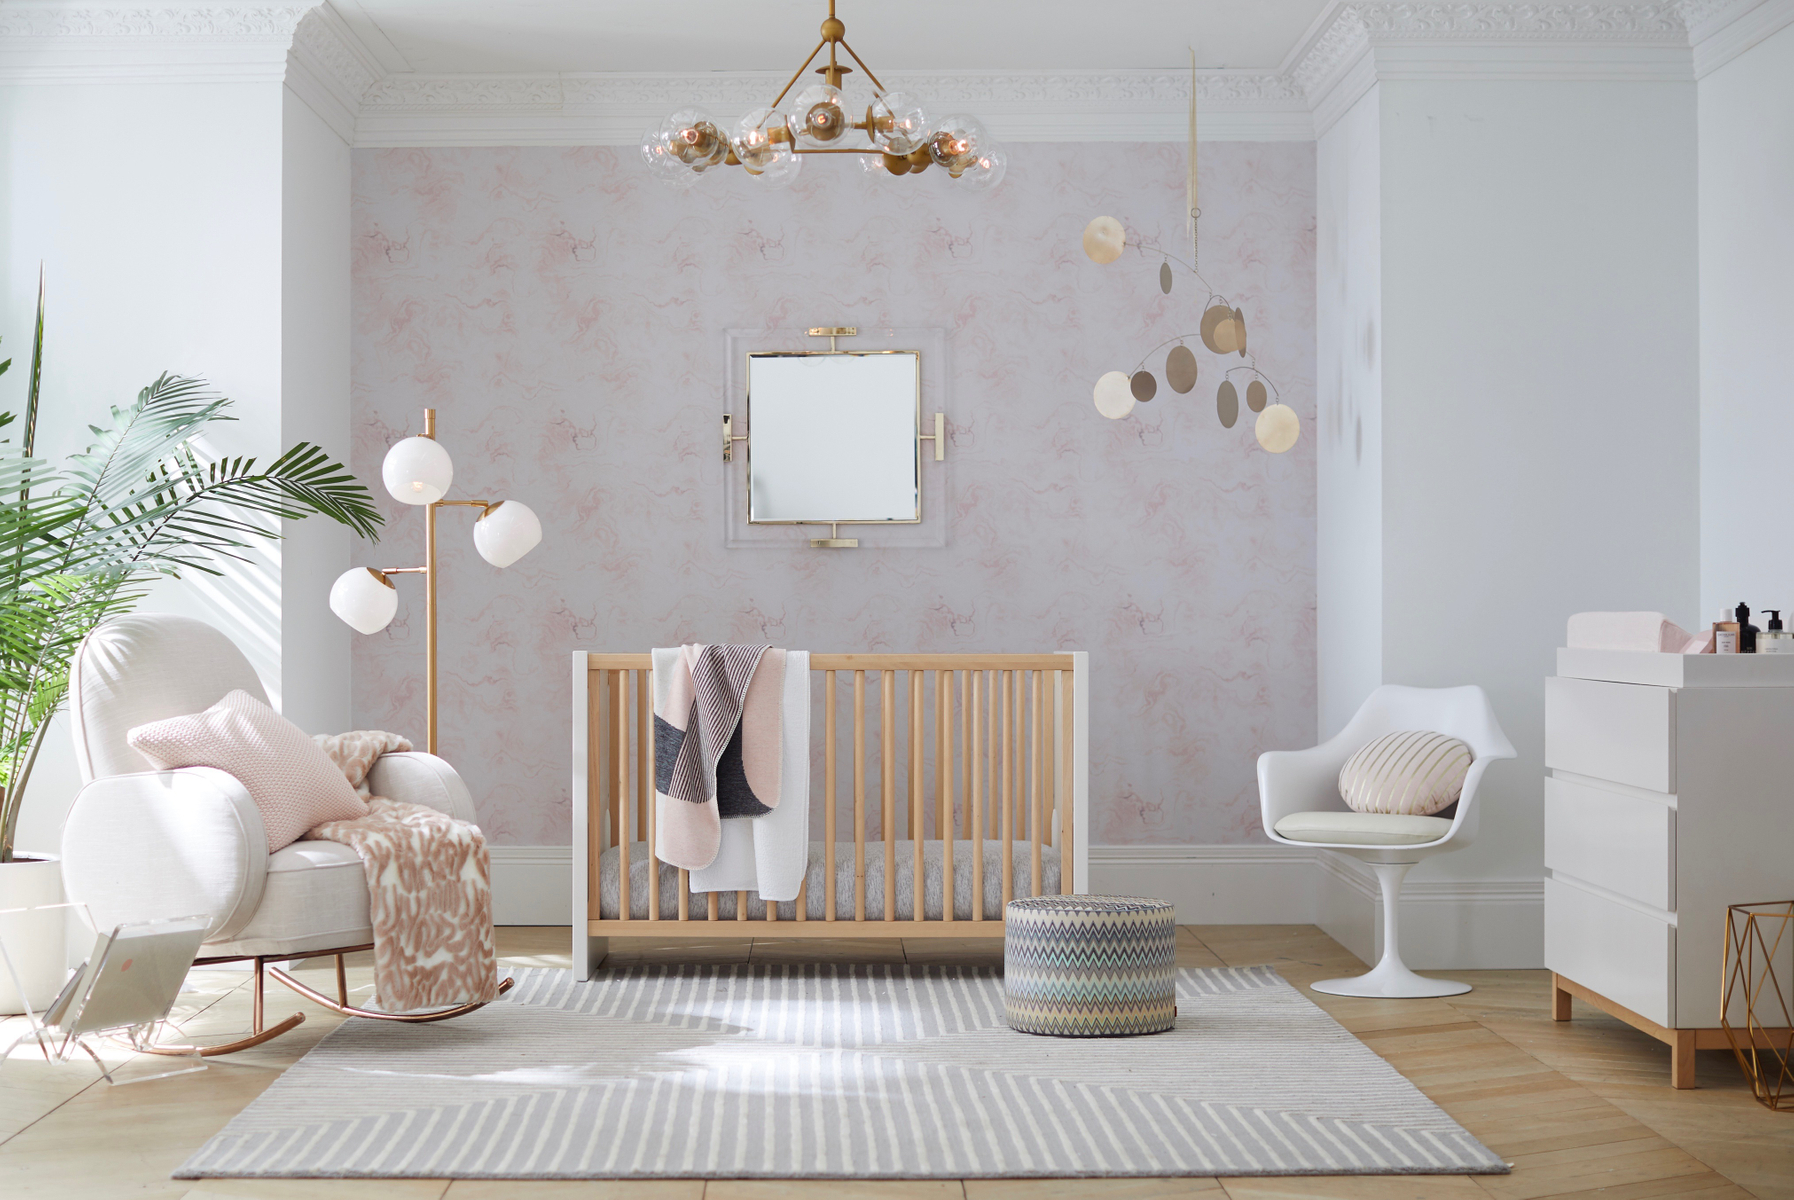 Baby's room decorating ideas, pink and white